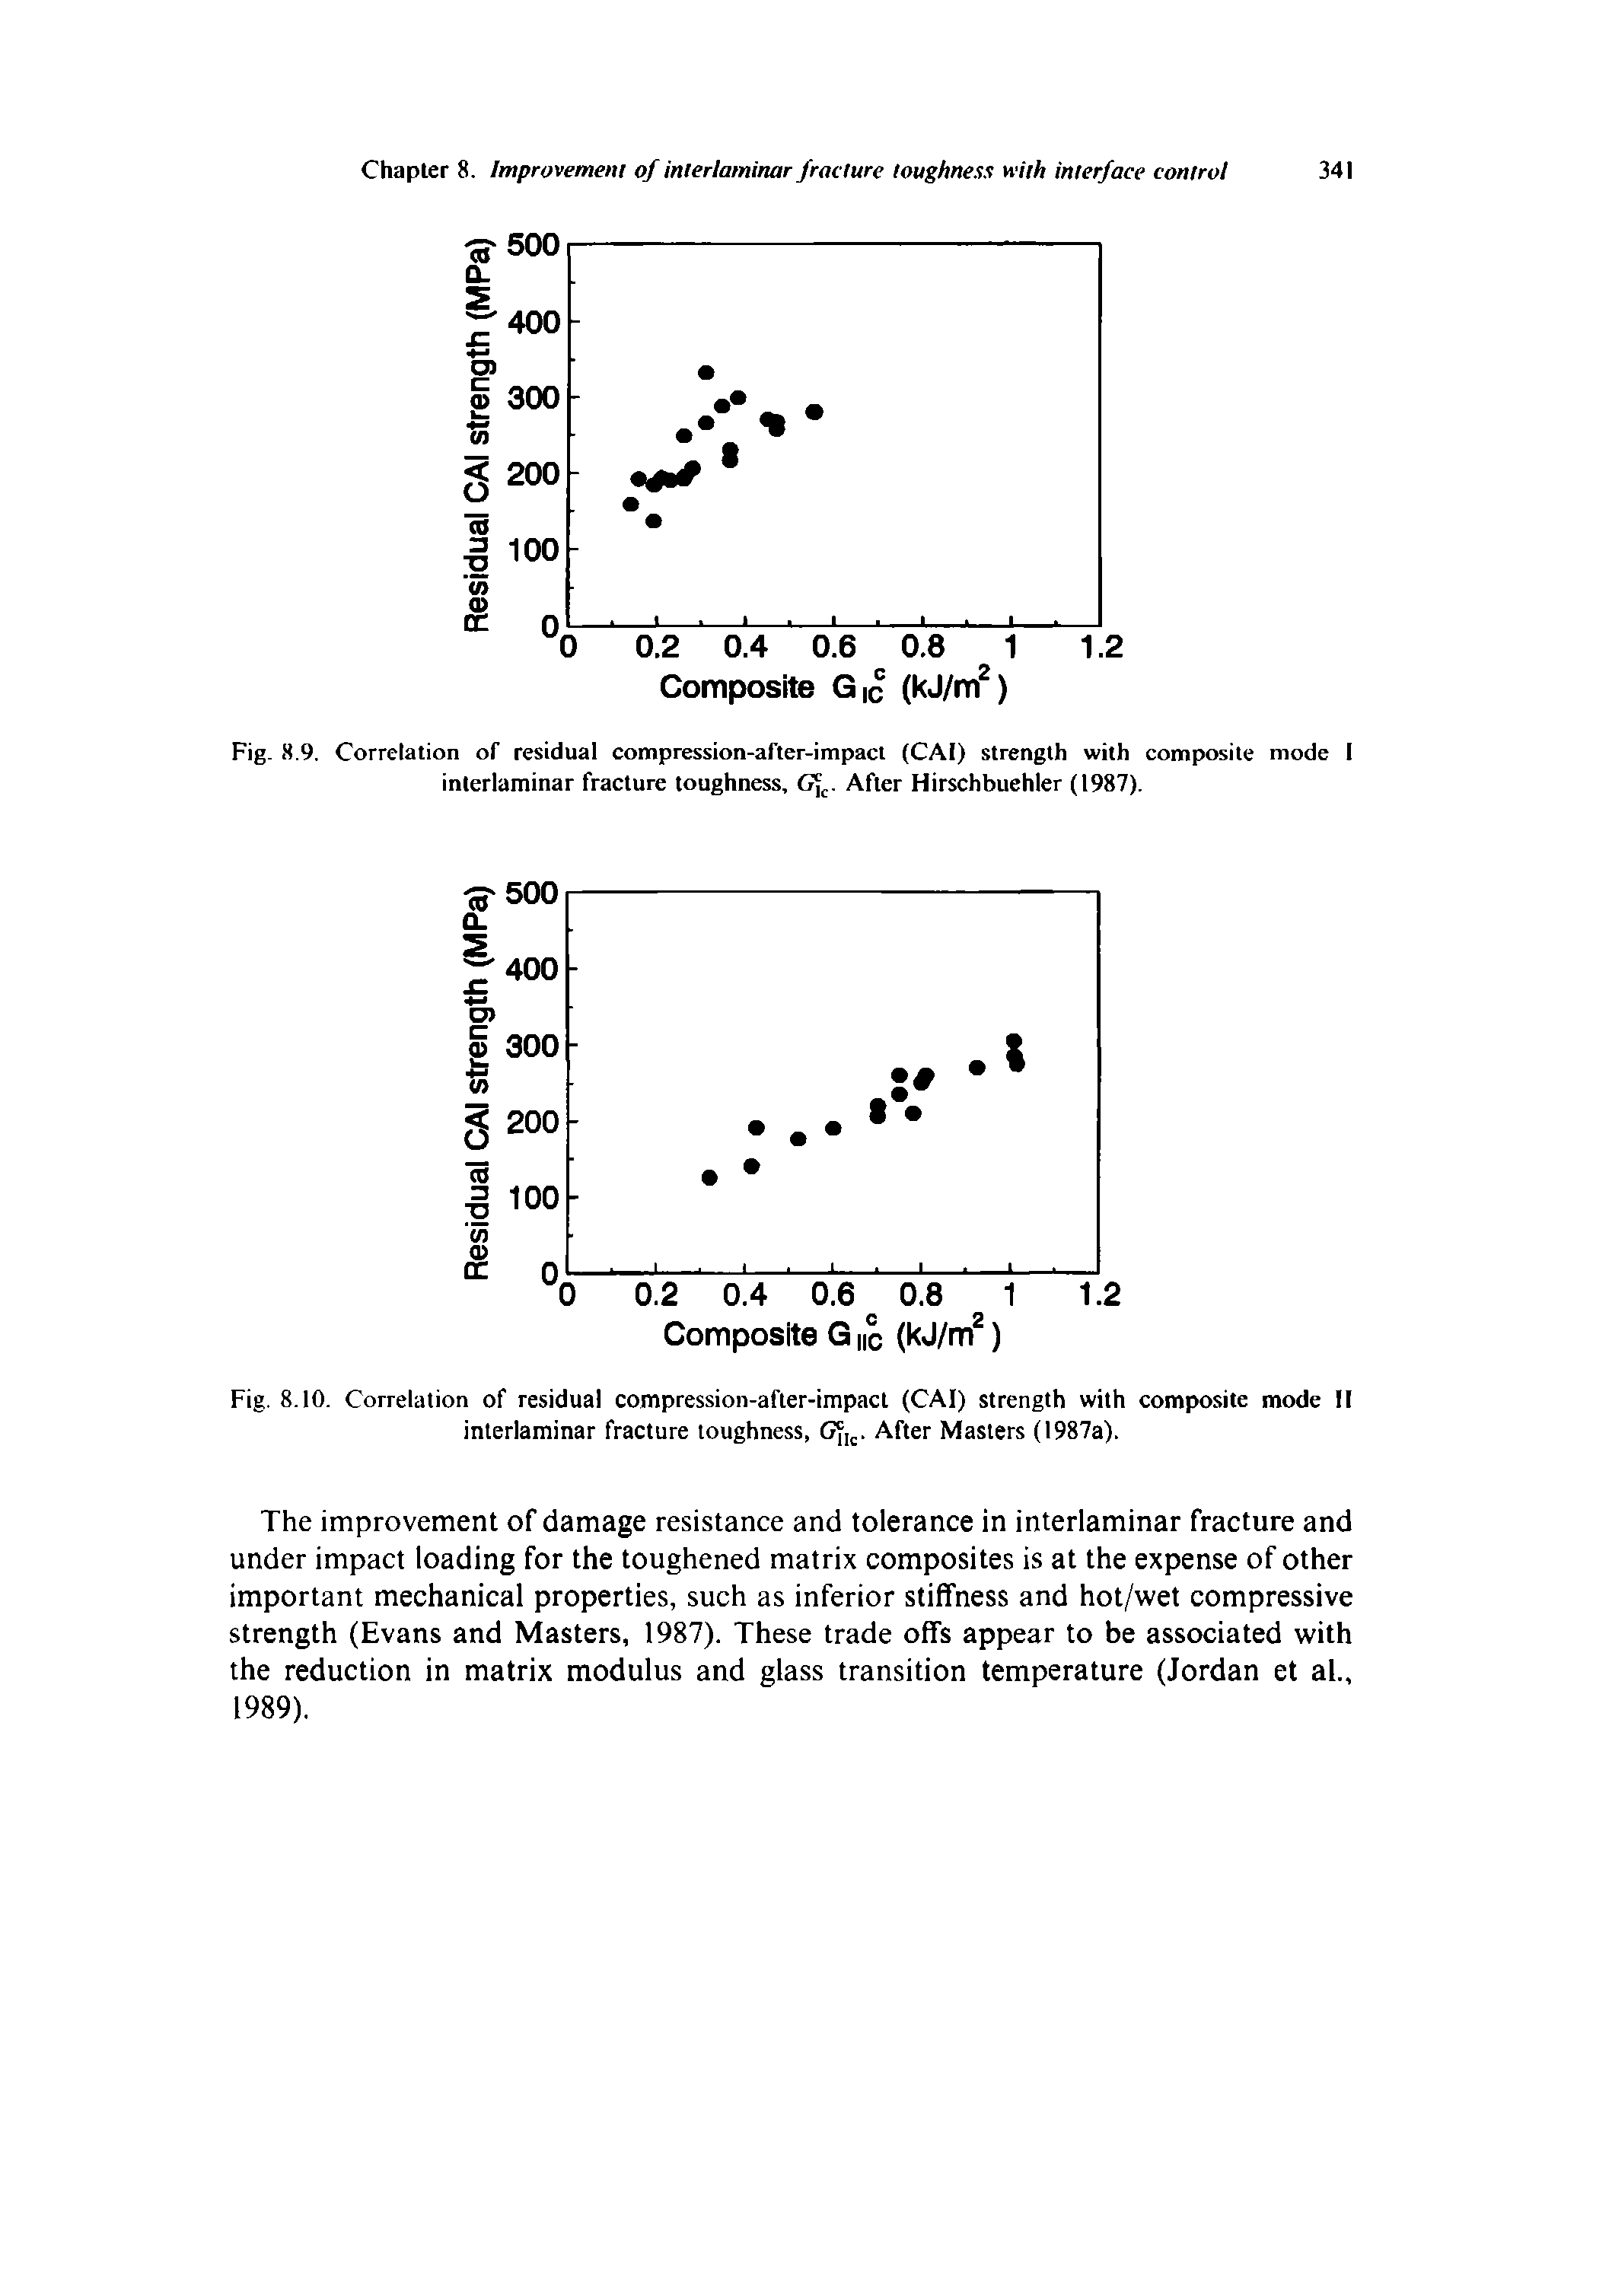 Fig. 8.9, Correlation of residual compression-after-impacl (CAI) strength with composite mode I interlaminar fracture toughness, After Hirschbuehler (1987).